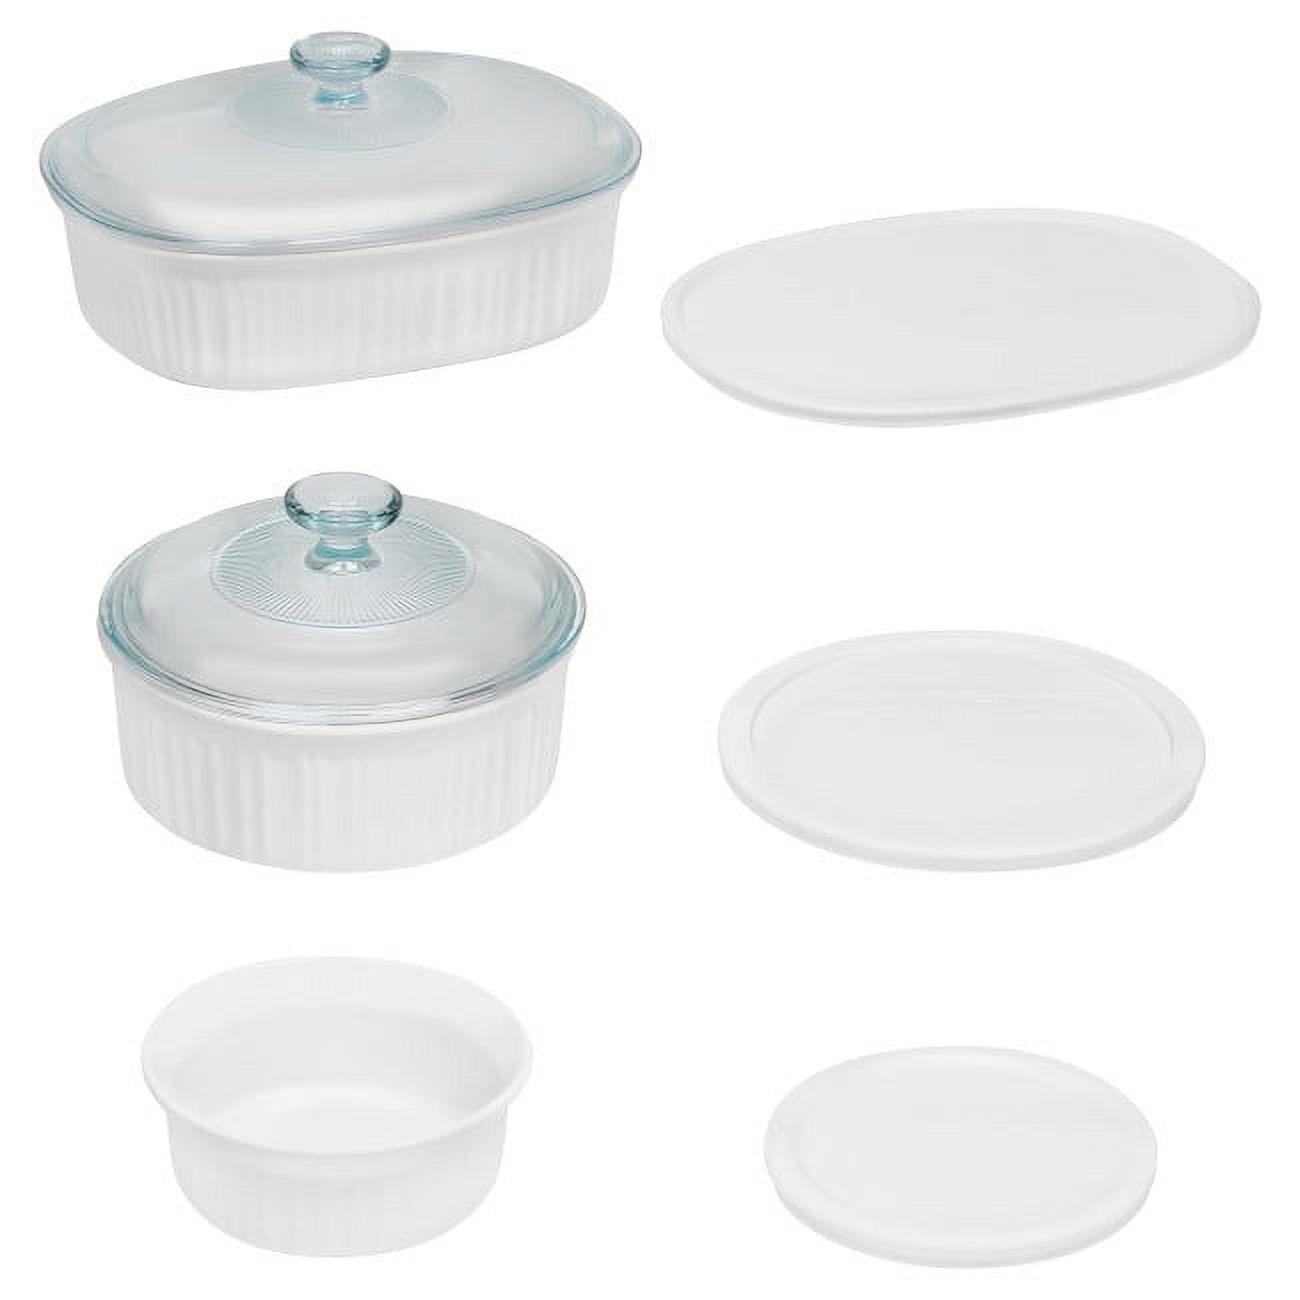 CorningWare French White 8-Piece Ceramic Stoneware Casserole Set with Glass and Plastic Lids, Round & Oval - image 1 of 6